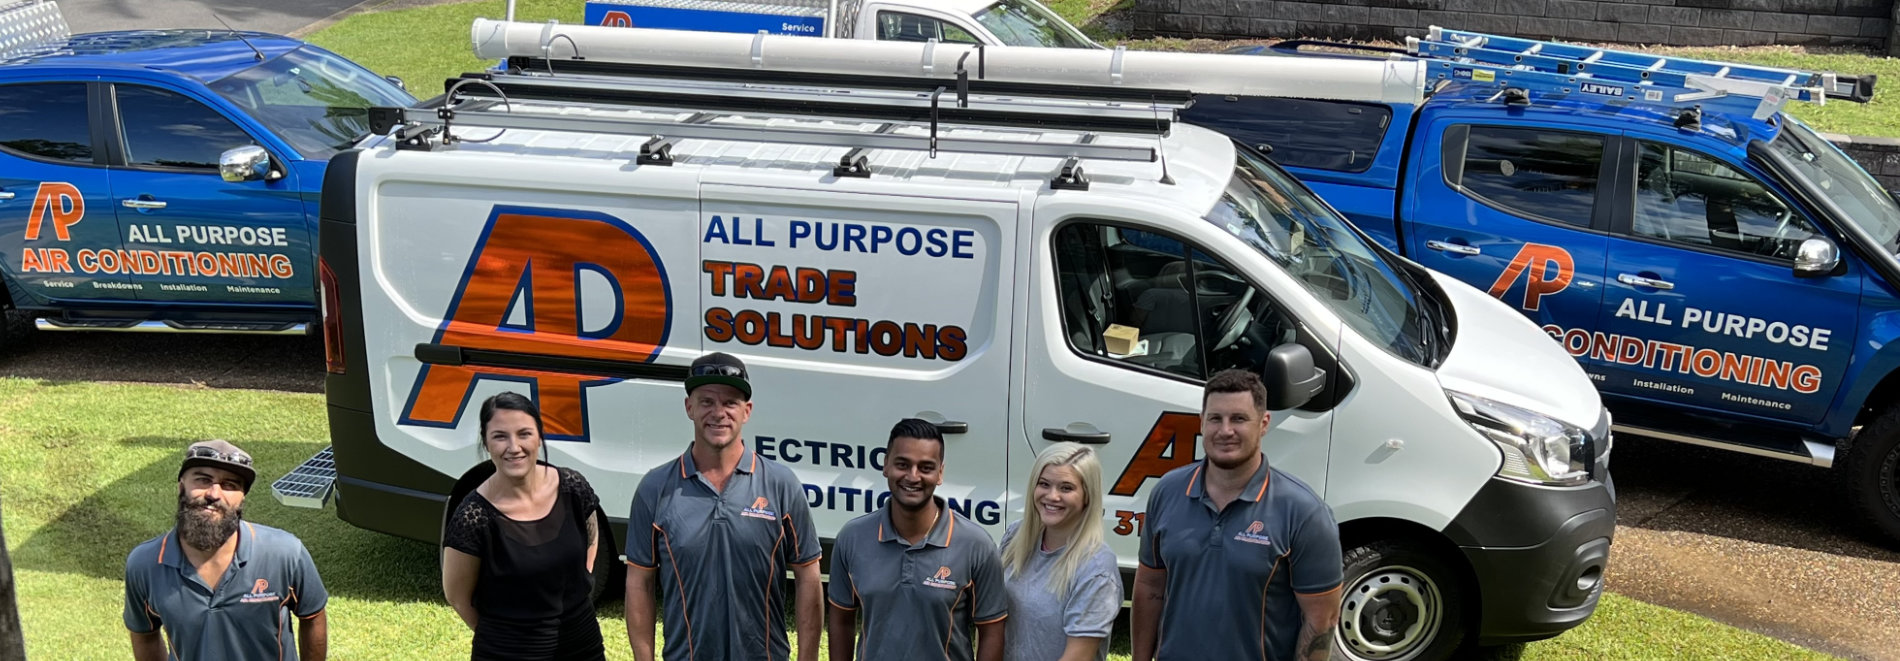 All Purpose Trade Solutions team standing with branded ute